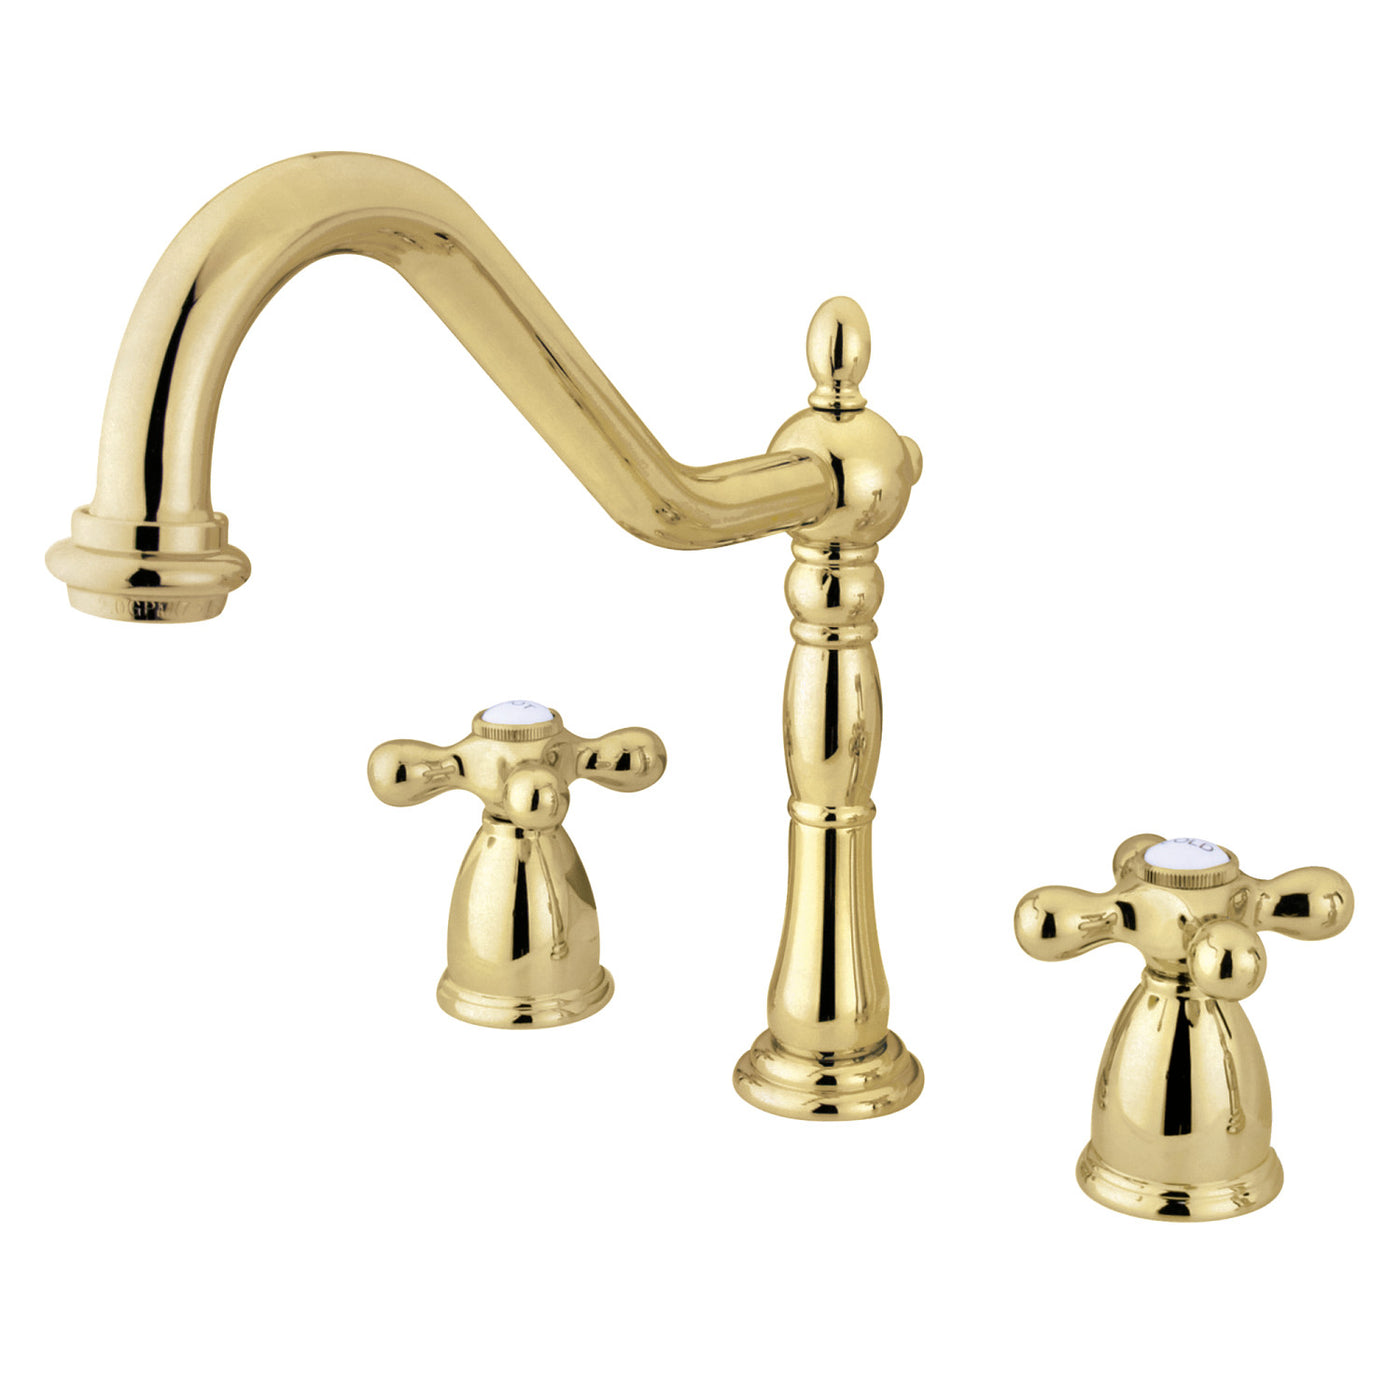 Elements of Design EB1792AXLS Widespread Kitchen Faucet, Polished Brass